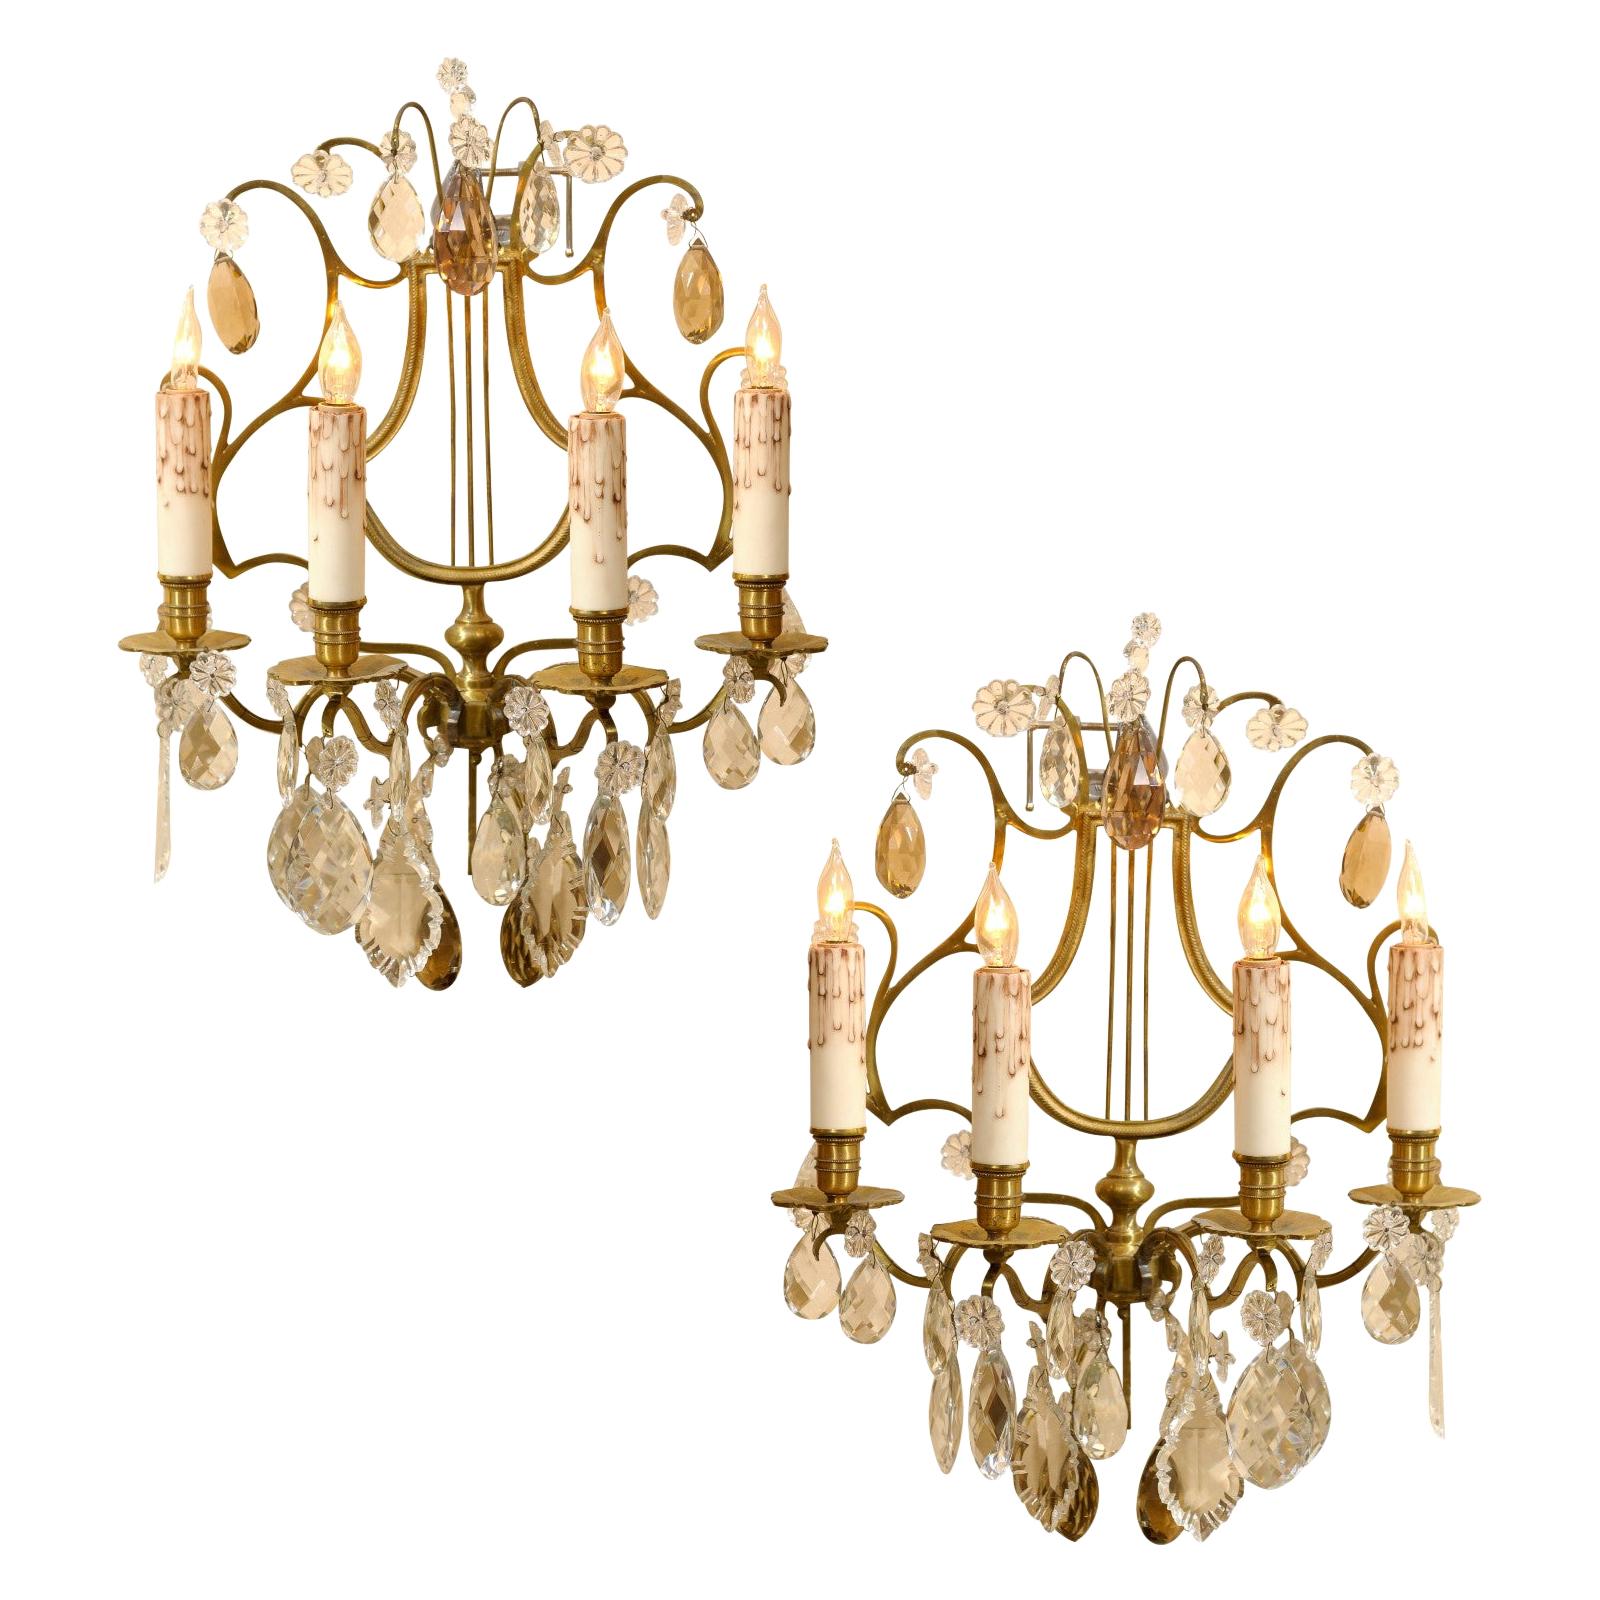 Pair of French 4-Light Lyre Brass Sconces with Amber Crystals, 19th Century